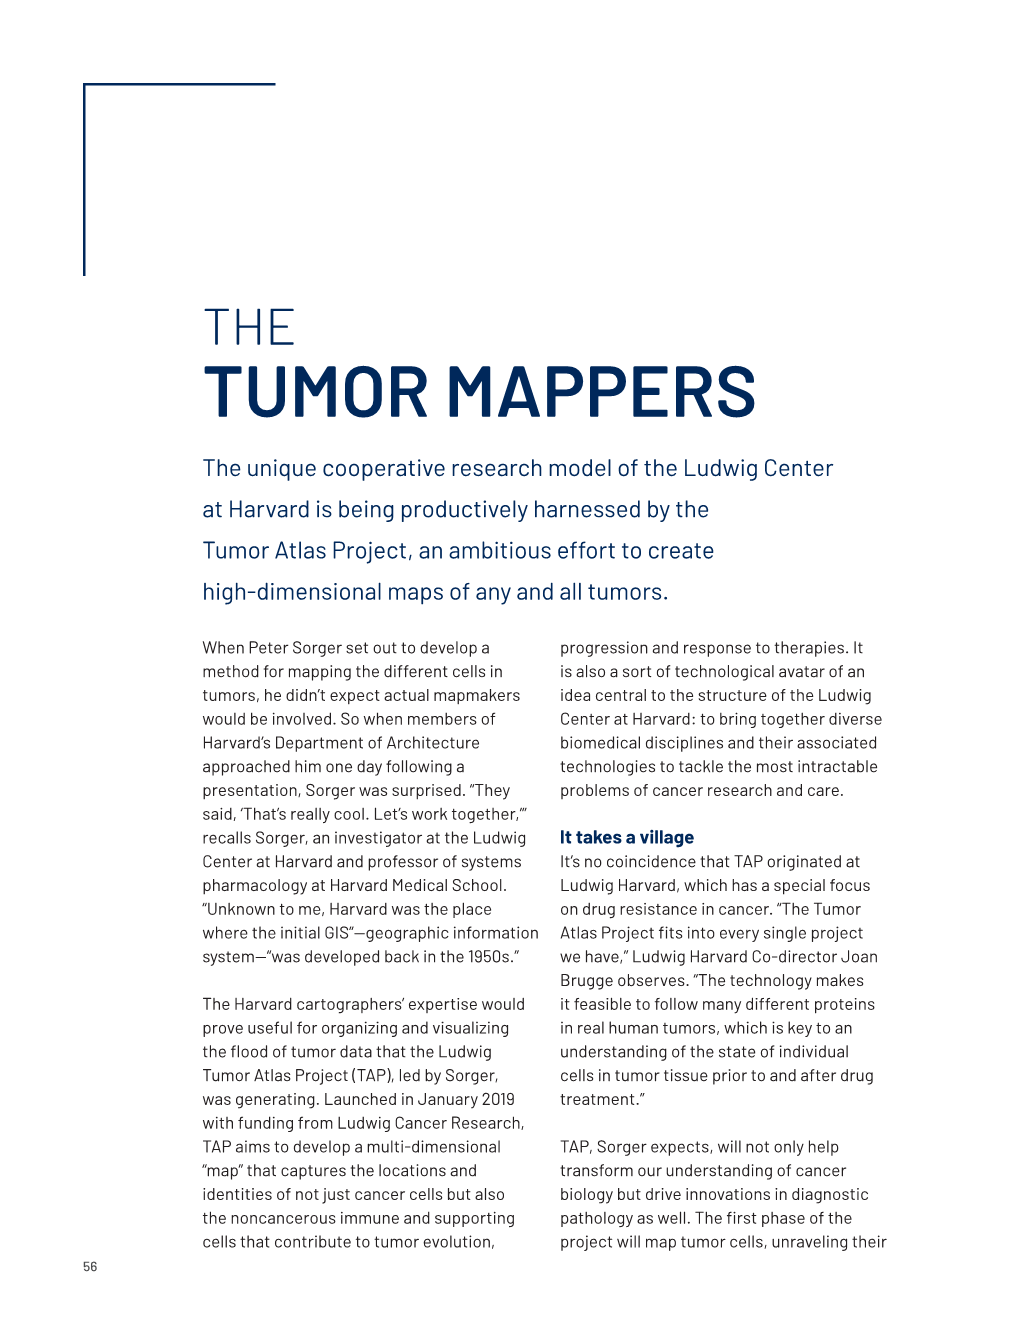 Tumor Mappers